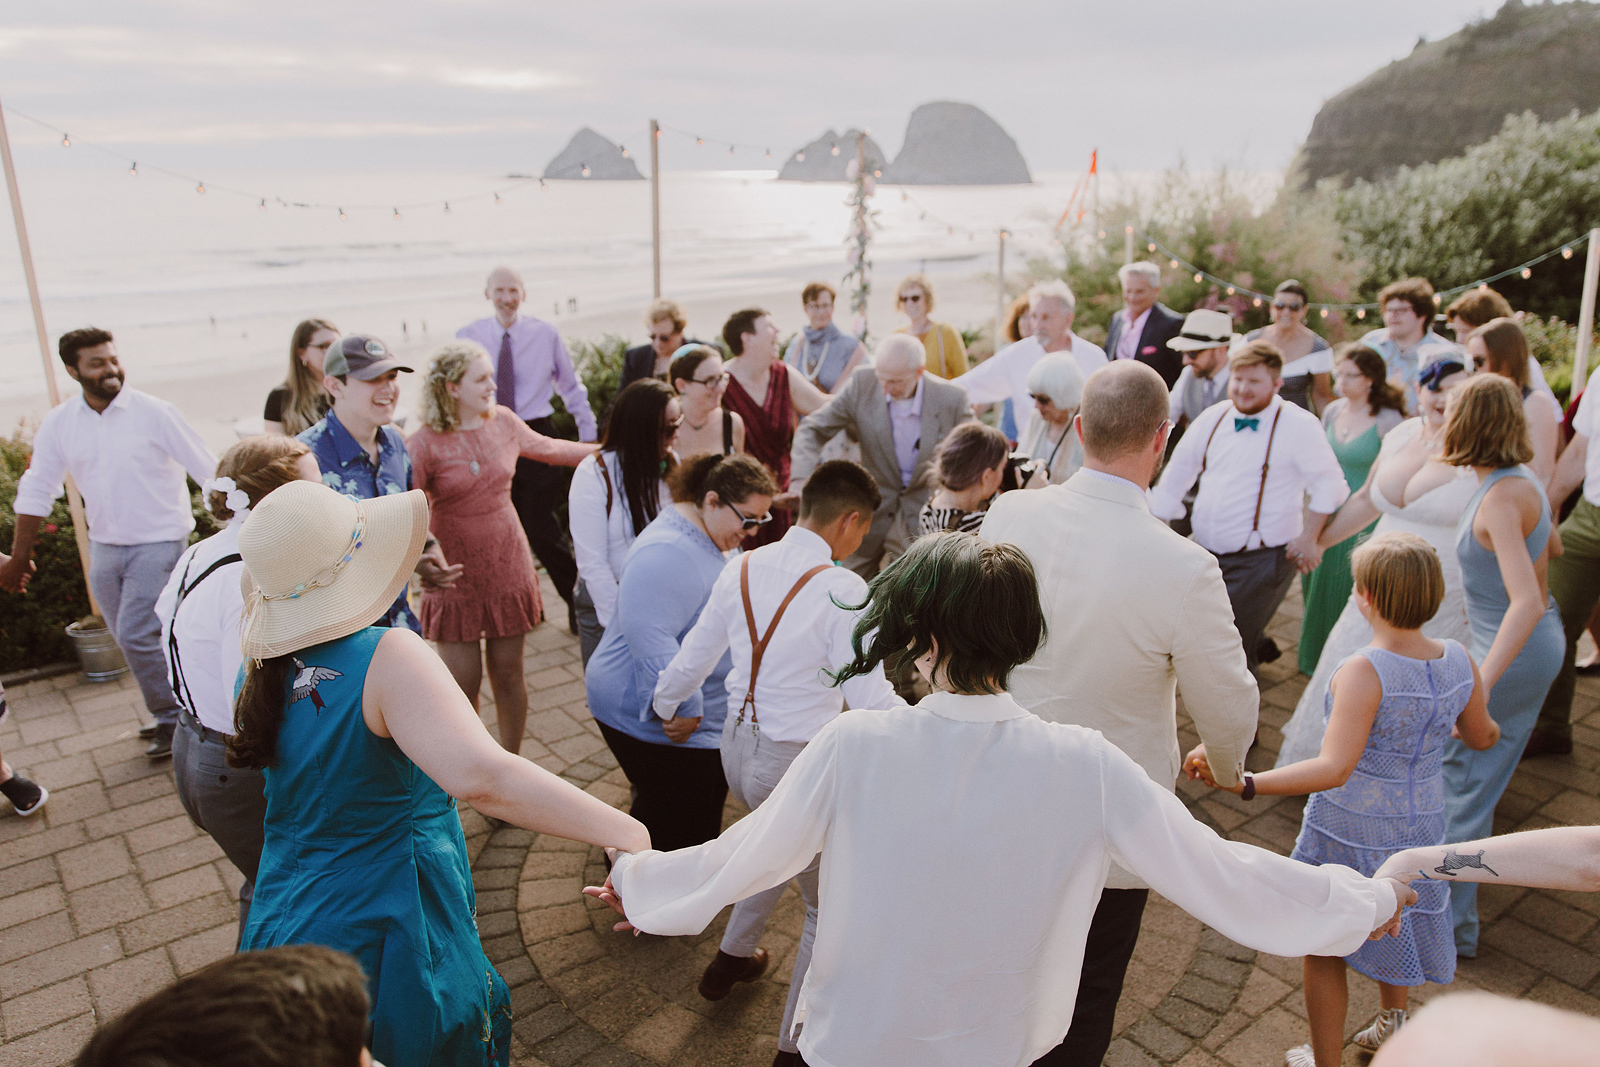 Guests dancing in circles during the hora - Oceanside Community Club Wedding on the Oregon Coast” title=